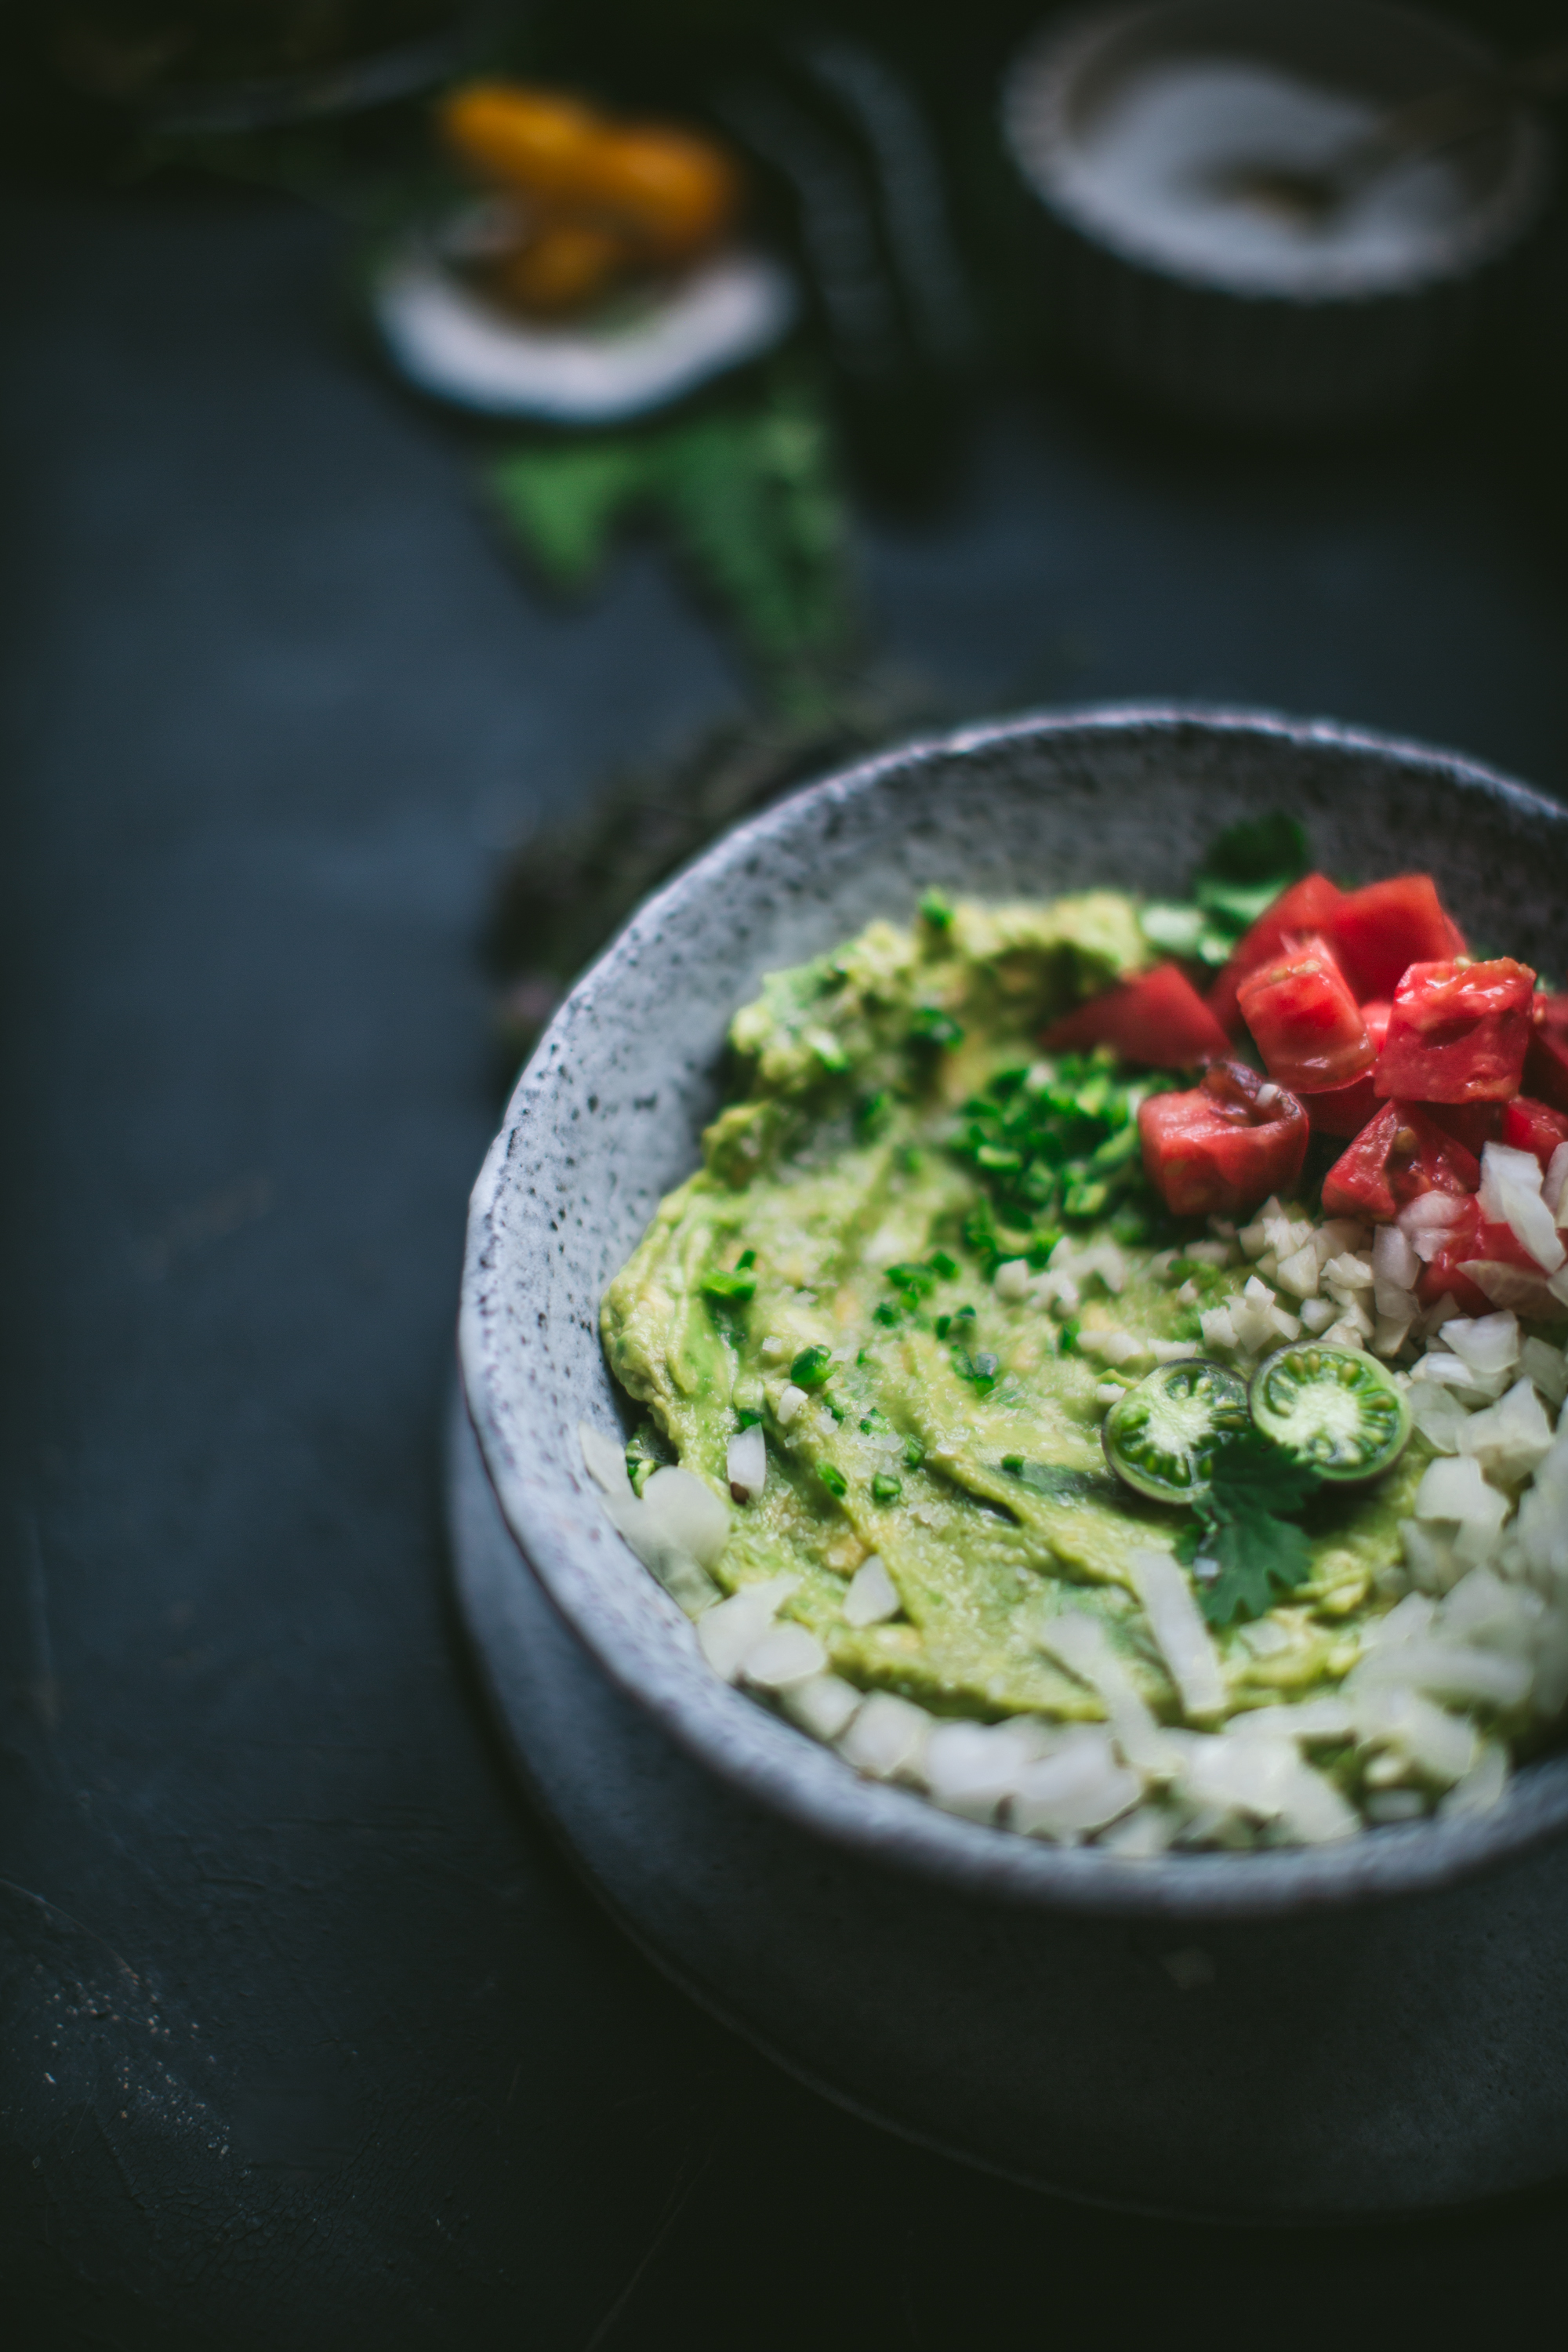 How to Make Guacamole, and easy summer recipe by Eva Kosmas Flores | Adventures in Cooking